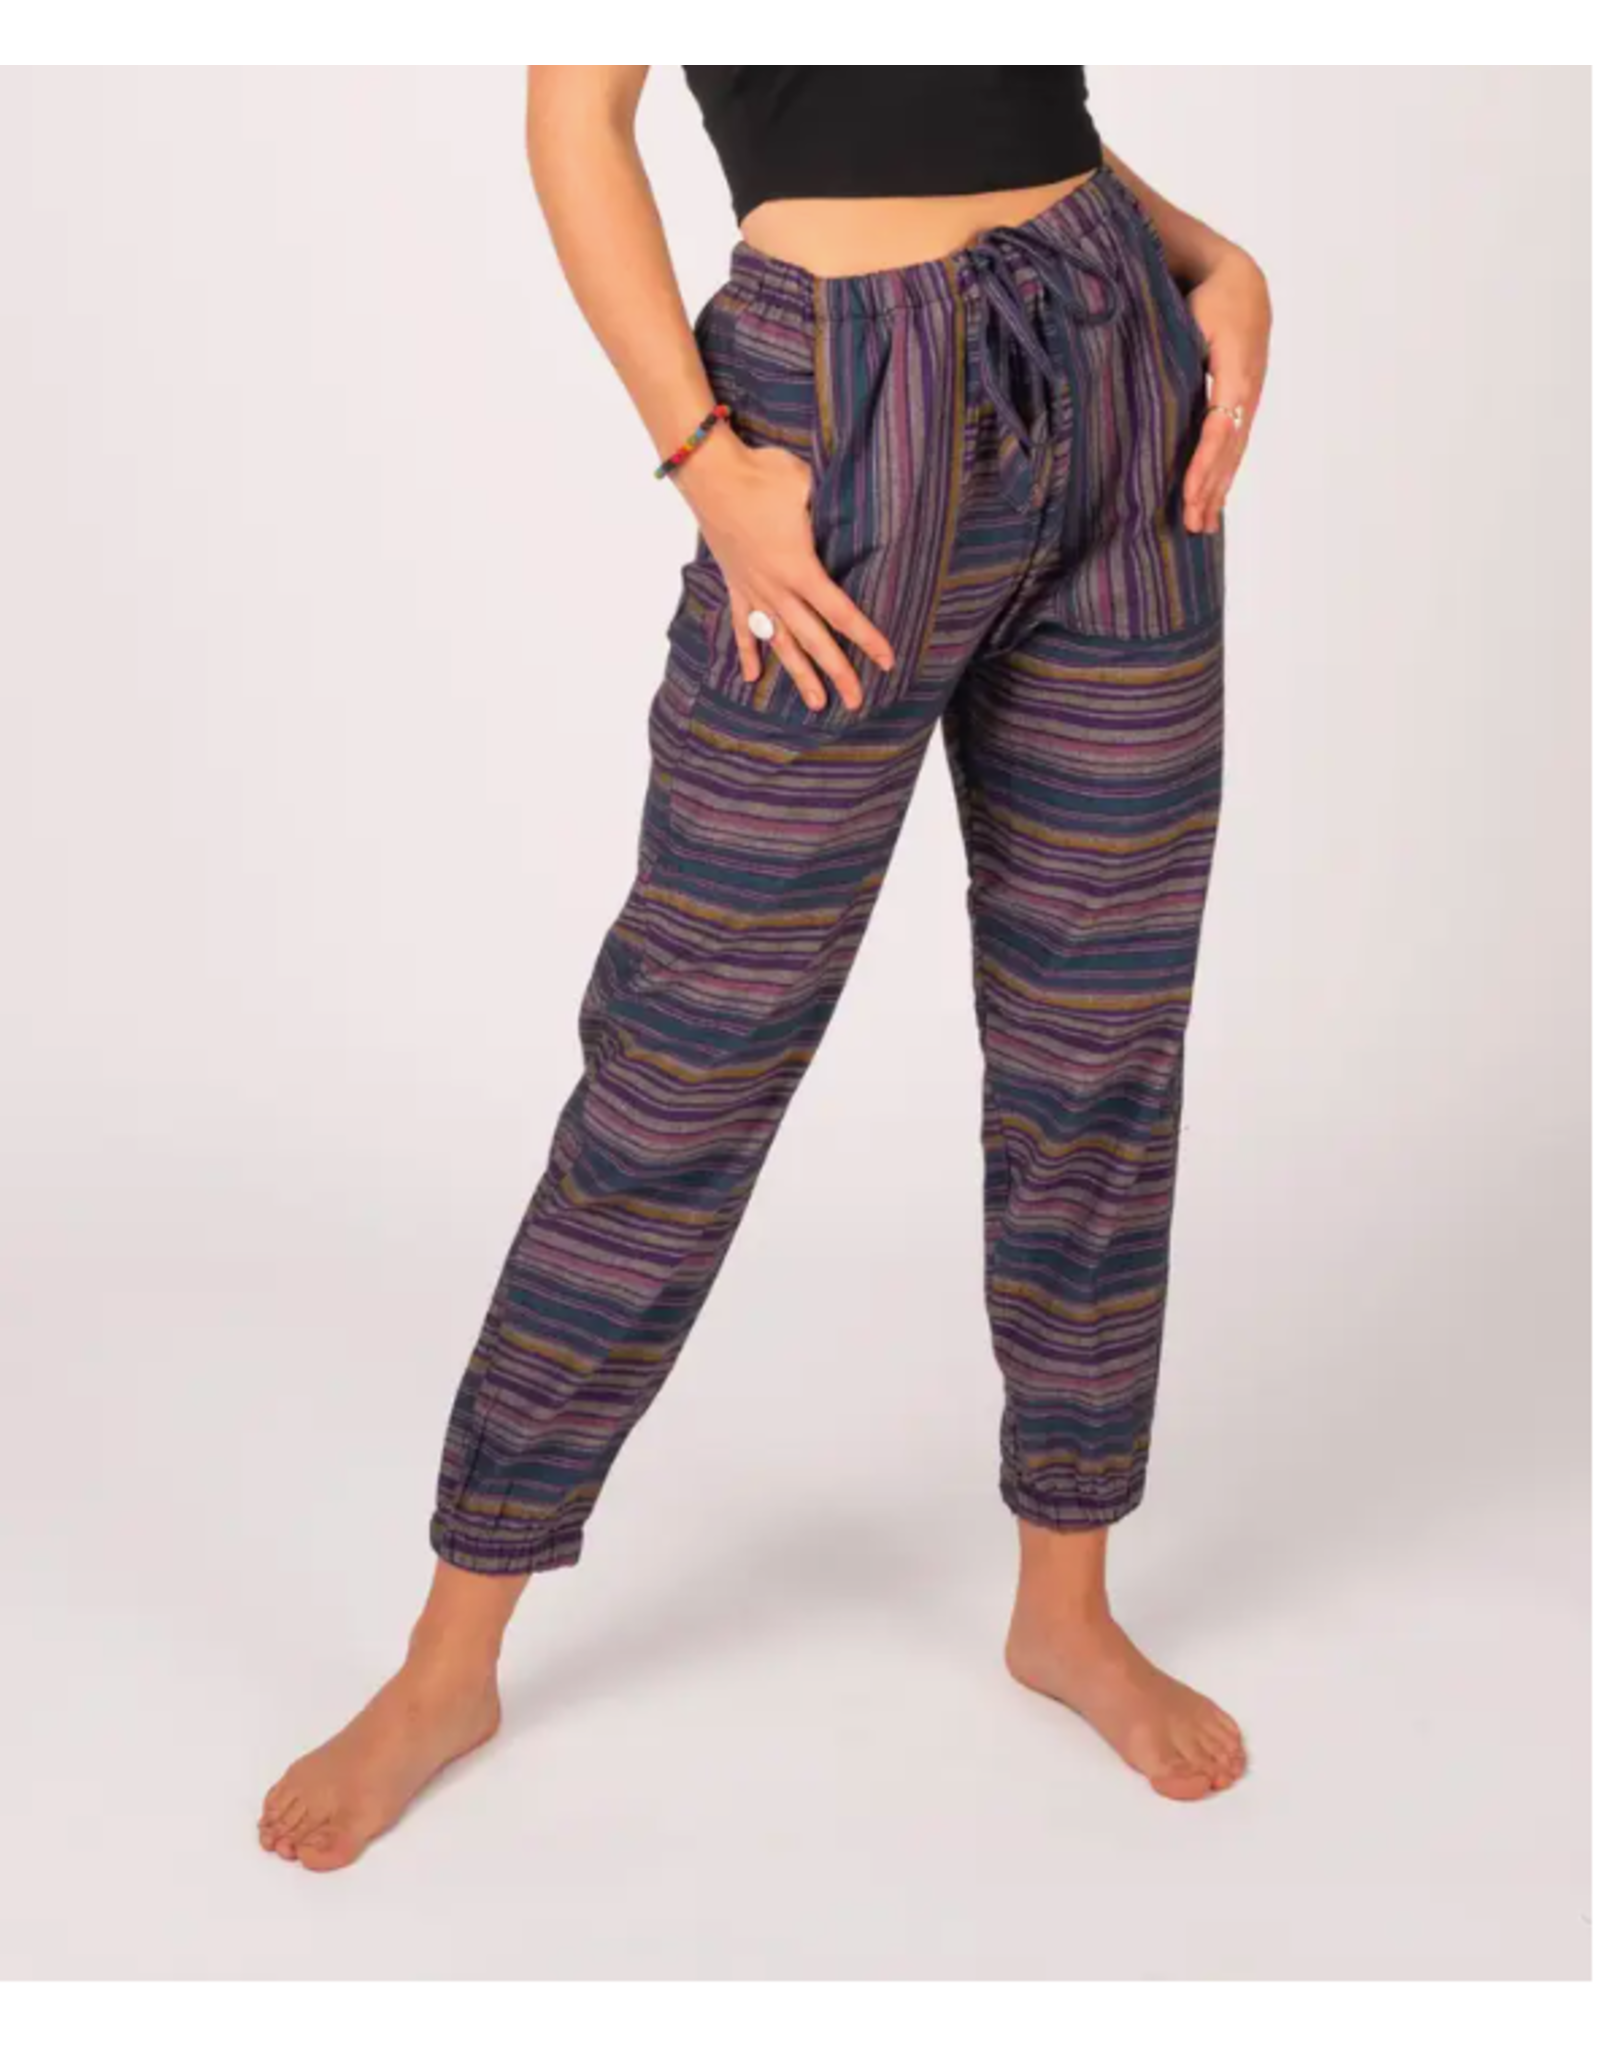 Trade roots Stripped Hippie Harem Pants, Rainbow